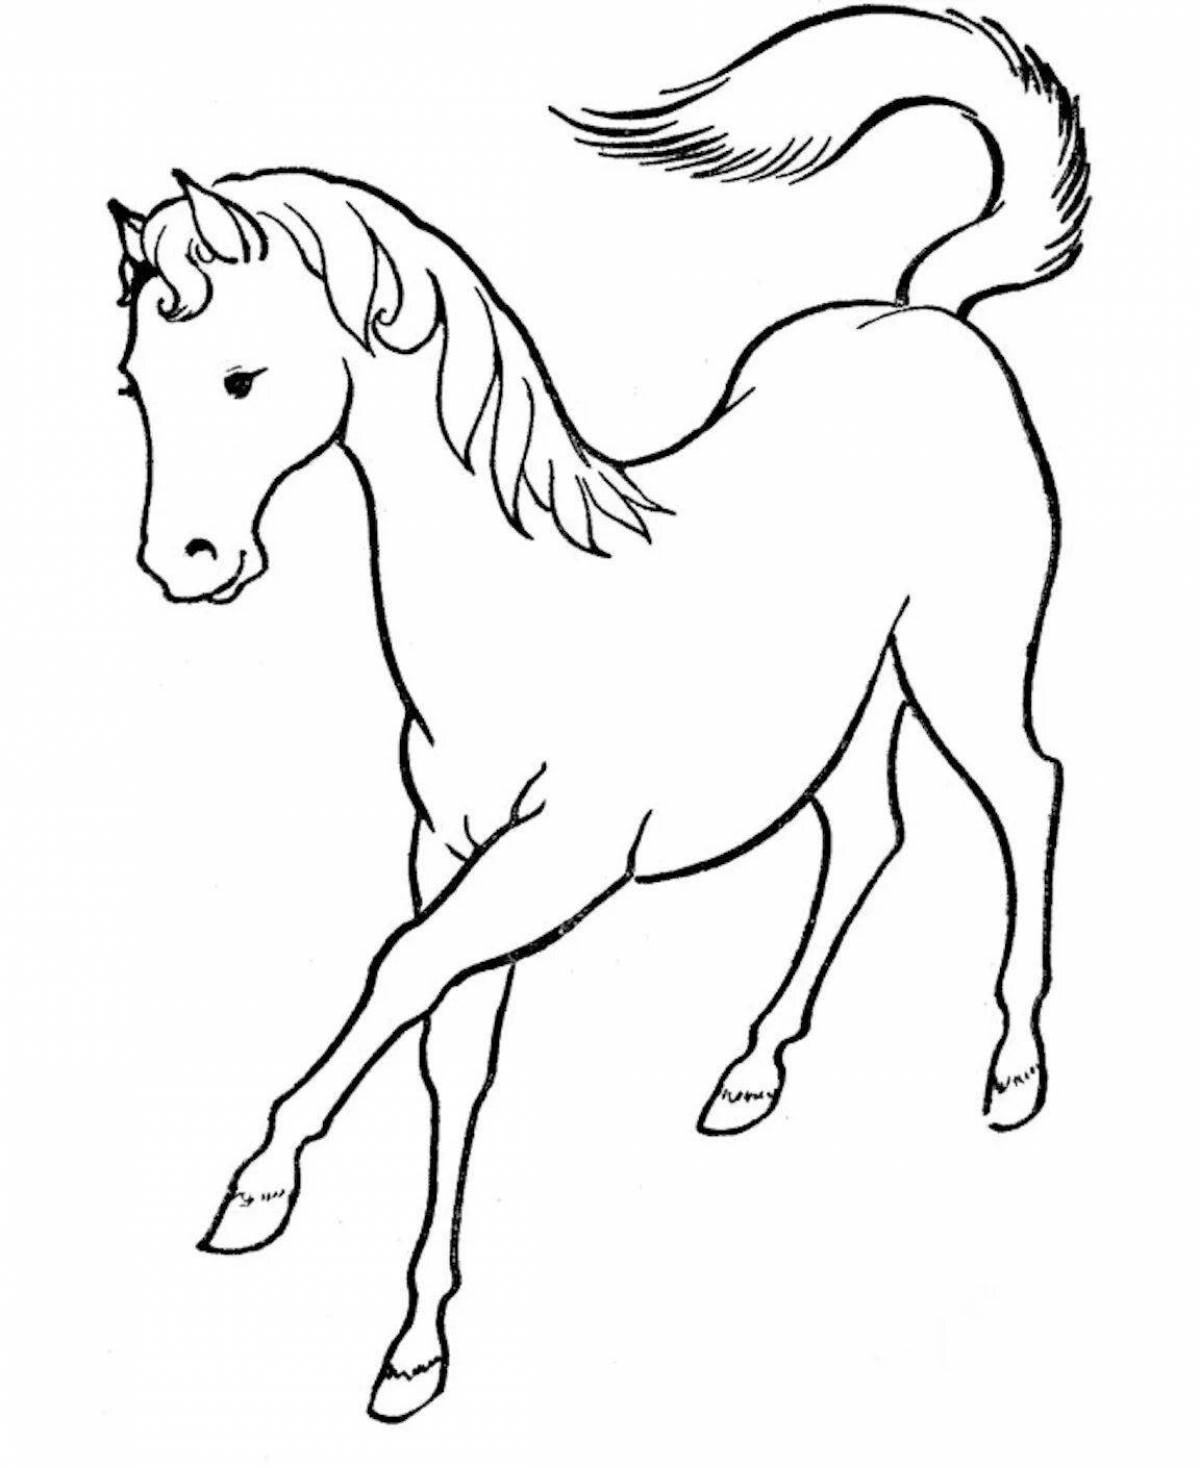 Playful mustang horse coloring book for kids